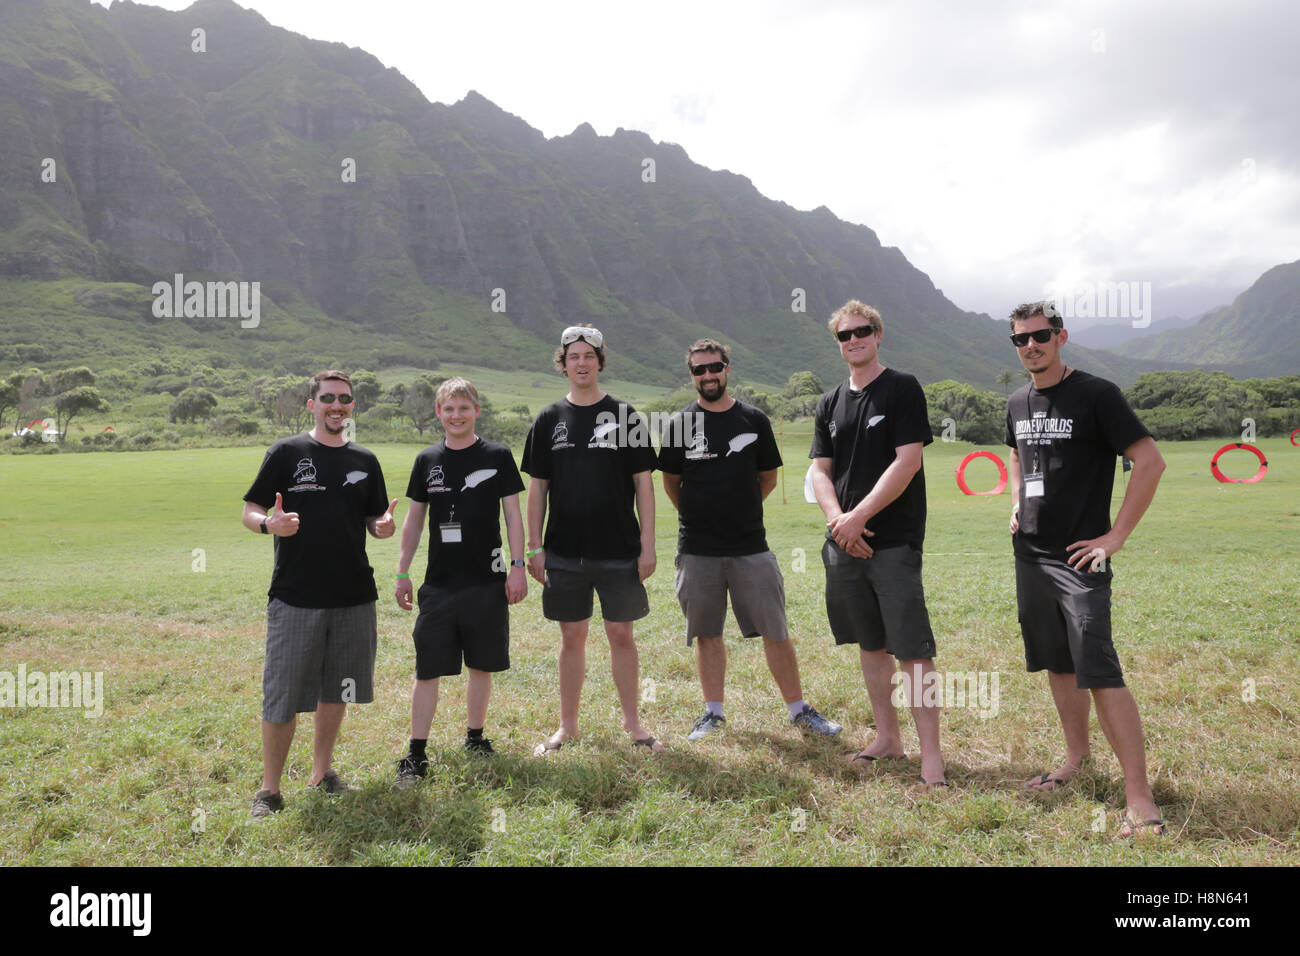 Drone Worlds 2016.  Drone racing competition, 2016.  Held on Koaloa ranch, O'hau island, Hawaii.  Pictured: Team New Zealand Stock Photo